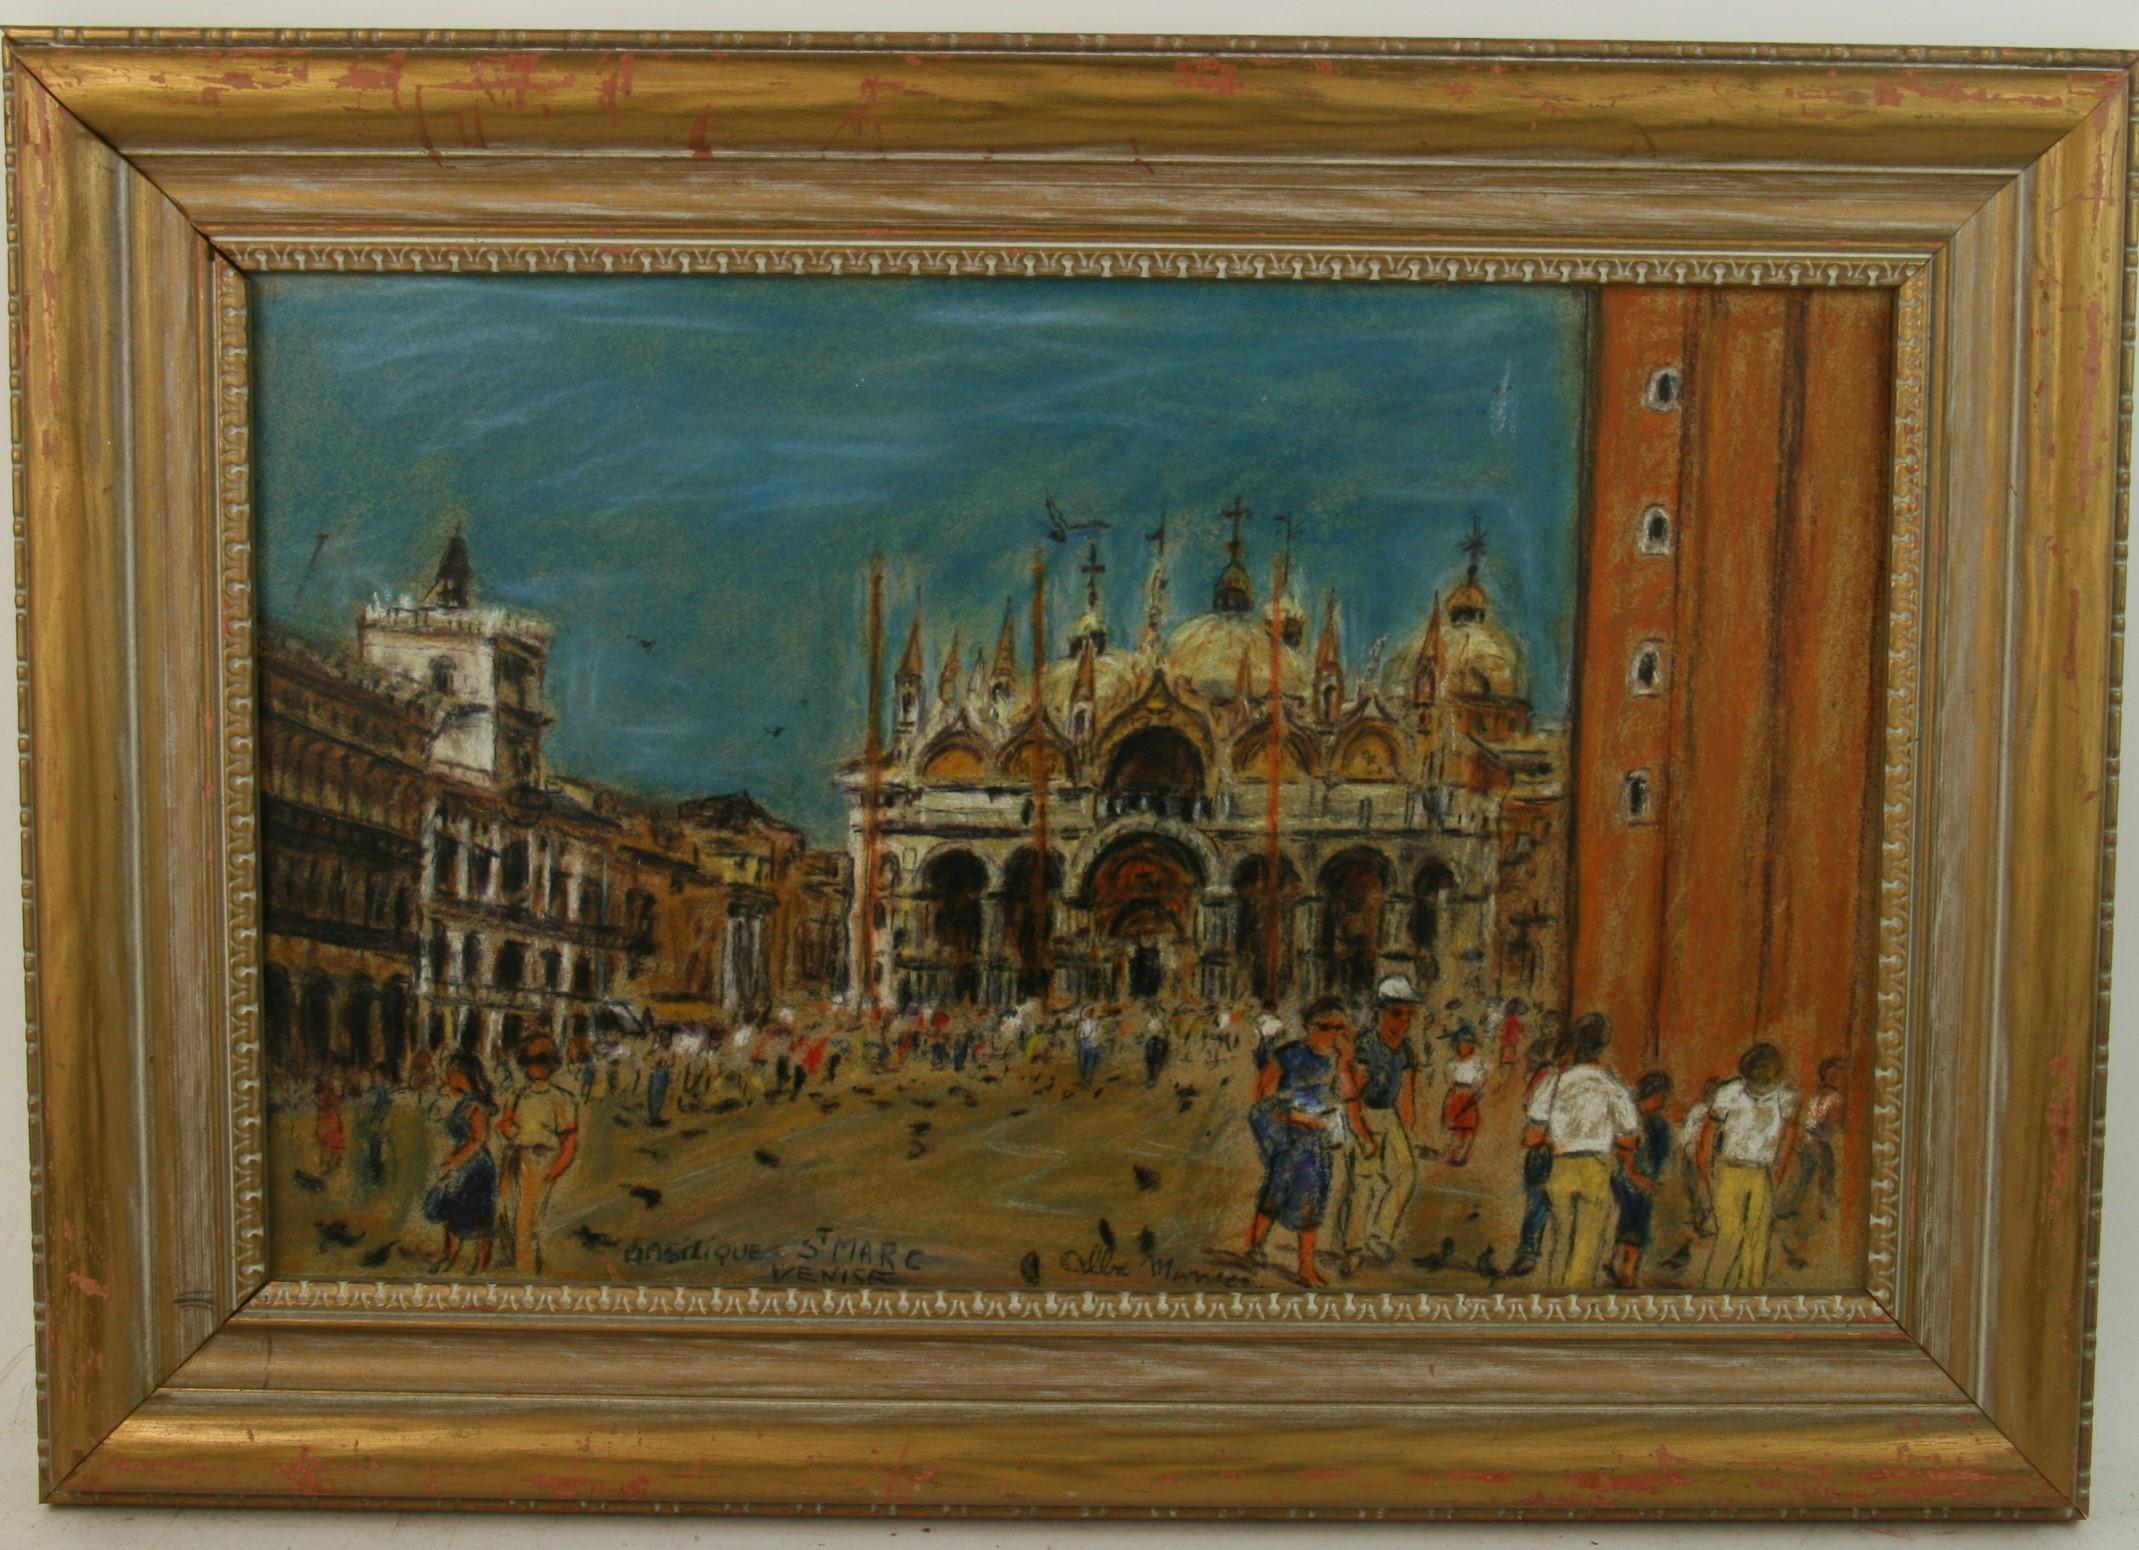  Italian  Vintage Mixed Media Basilica  Of St Mark Venice City Scape - Painting by Unknown